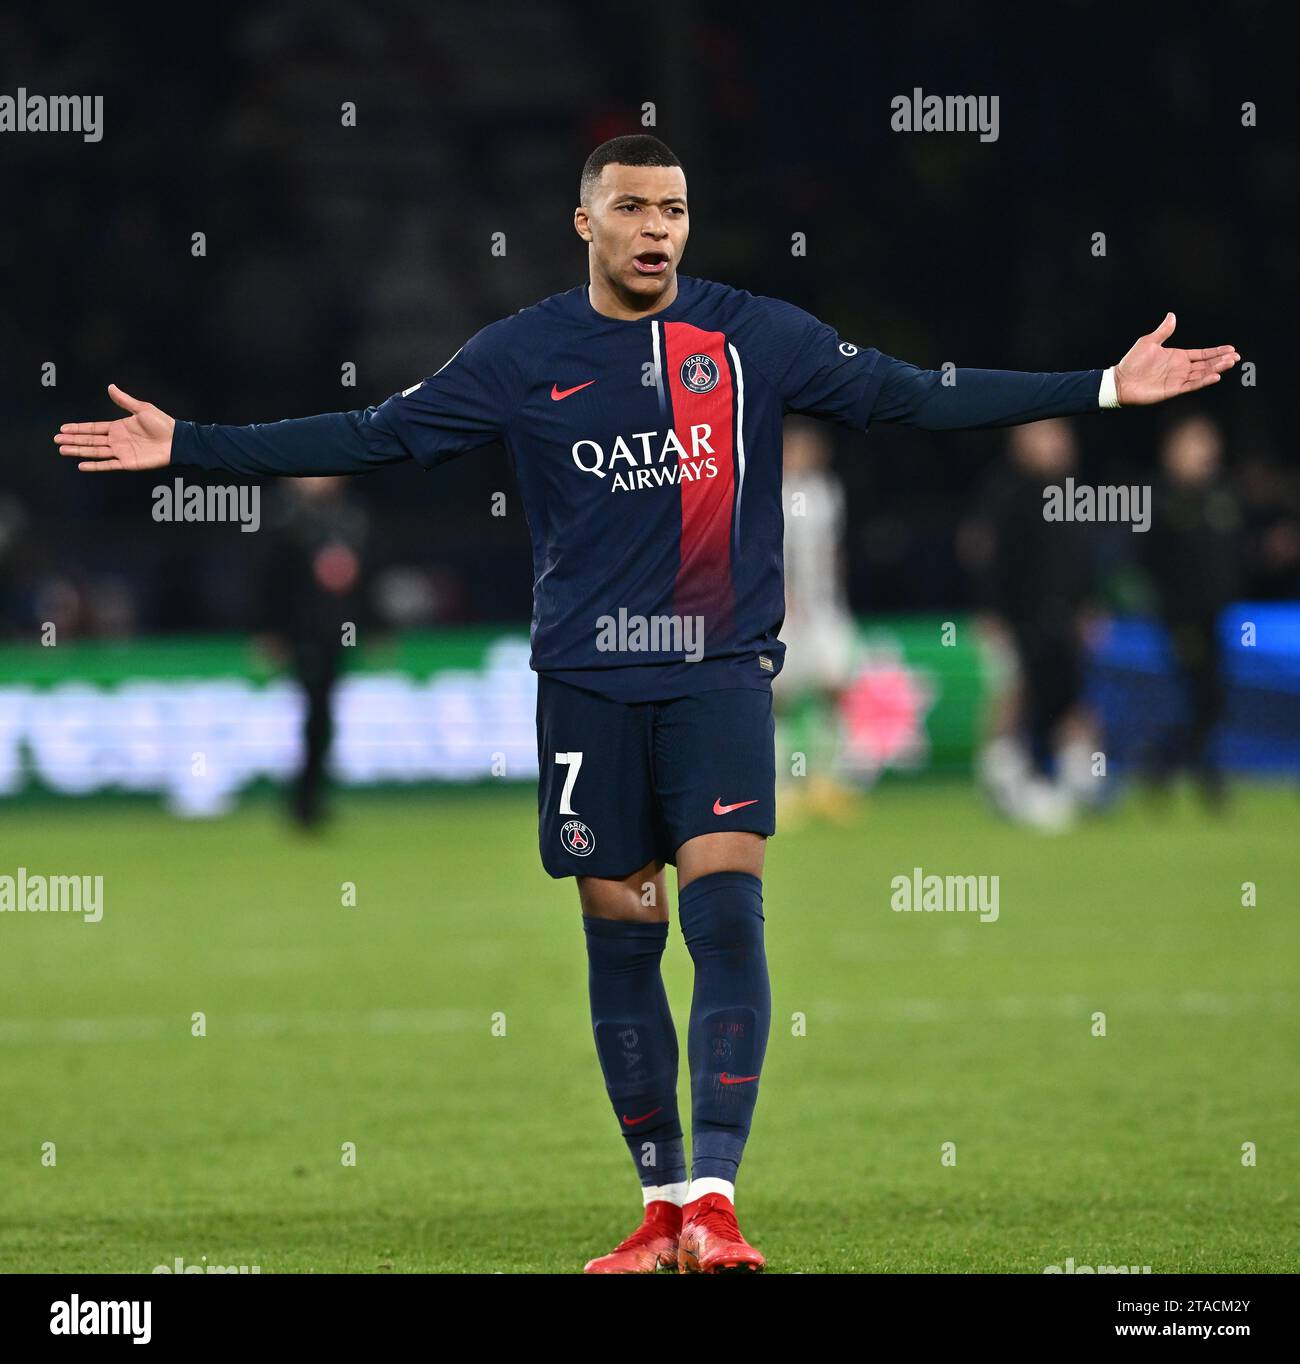 PARIS, FRANCE - NOVEMBER 28: Kylian Mbappe of PSG open arms gesture during the UEFA Champions League match between Paris Saint-Germain and Newcastle U Stock Photo